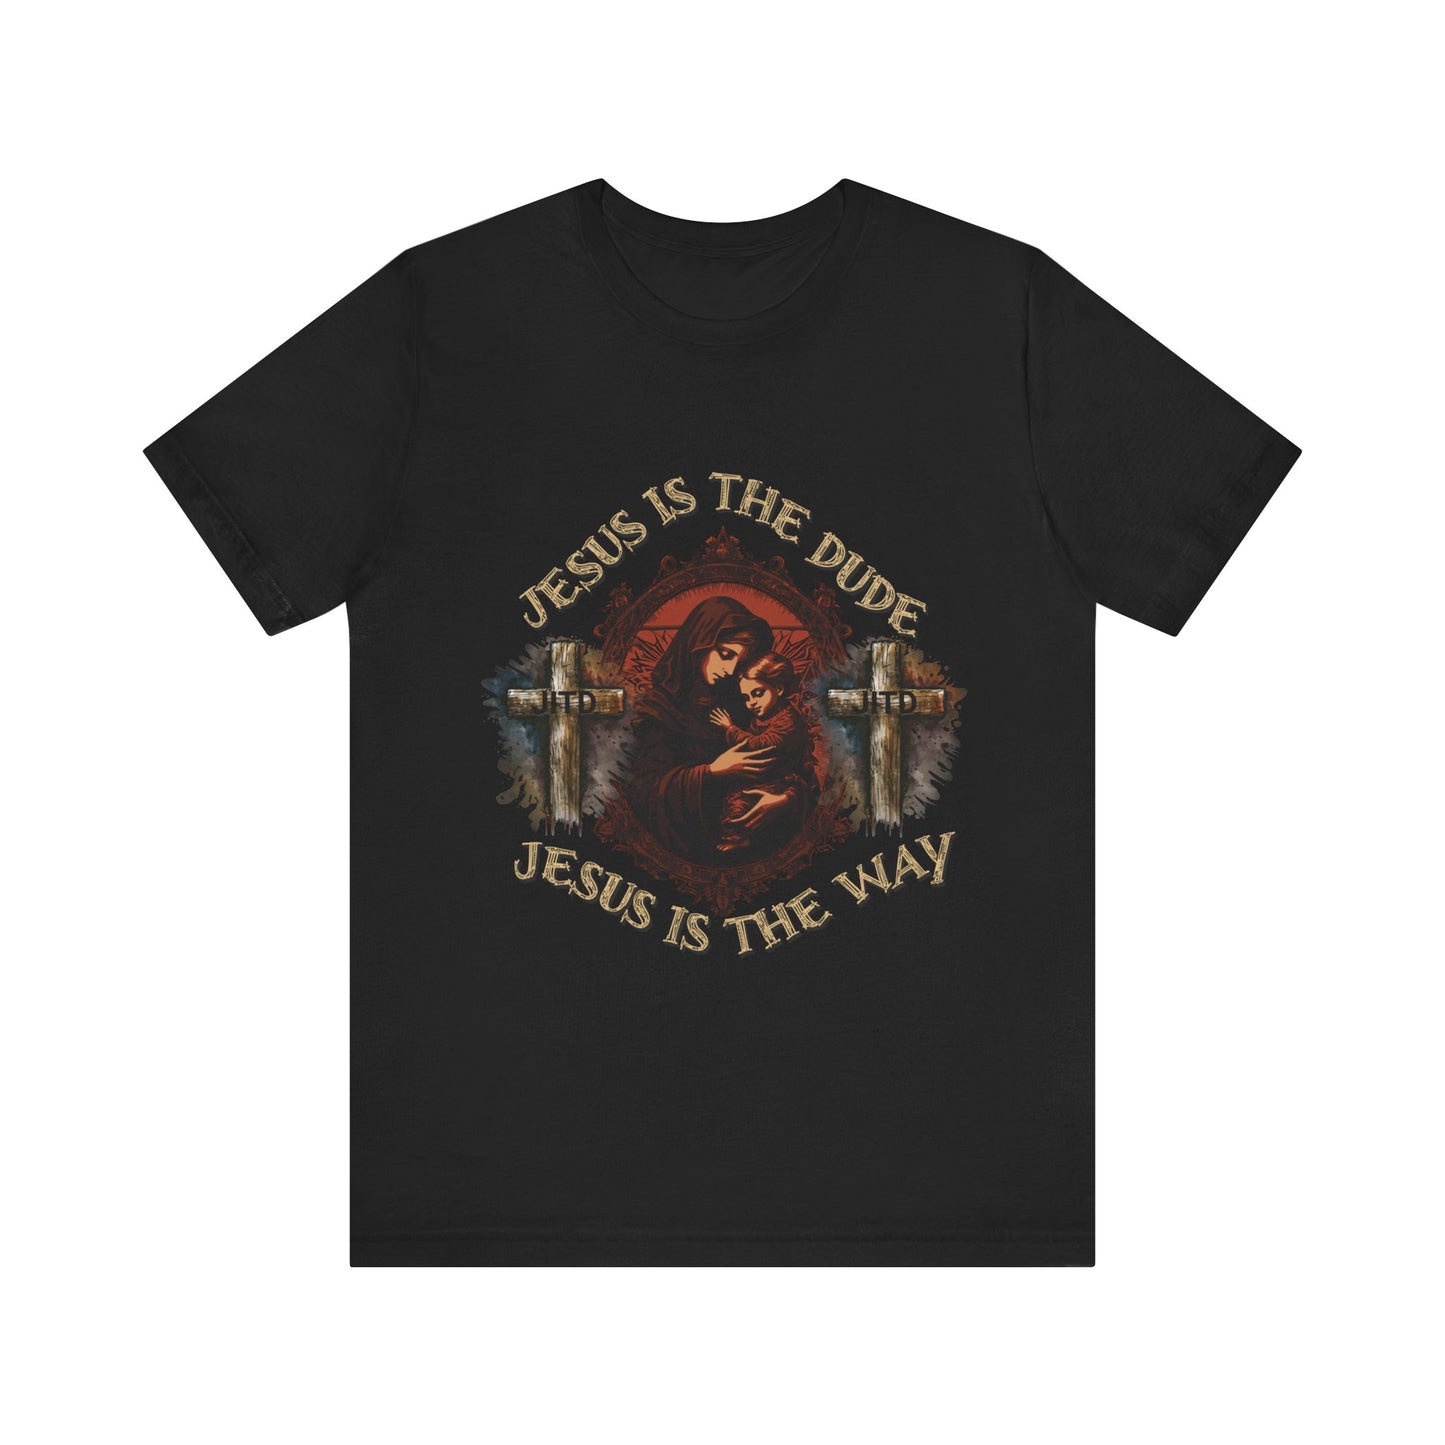 JESUS IS THE DUDE "AND THE WAY" TEE